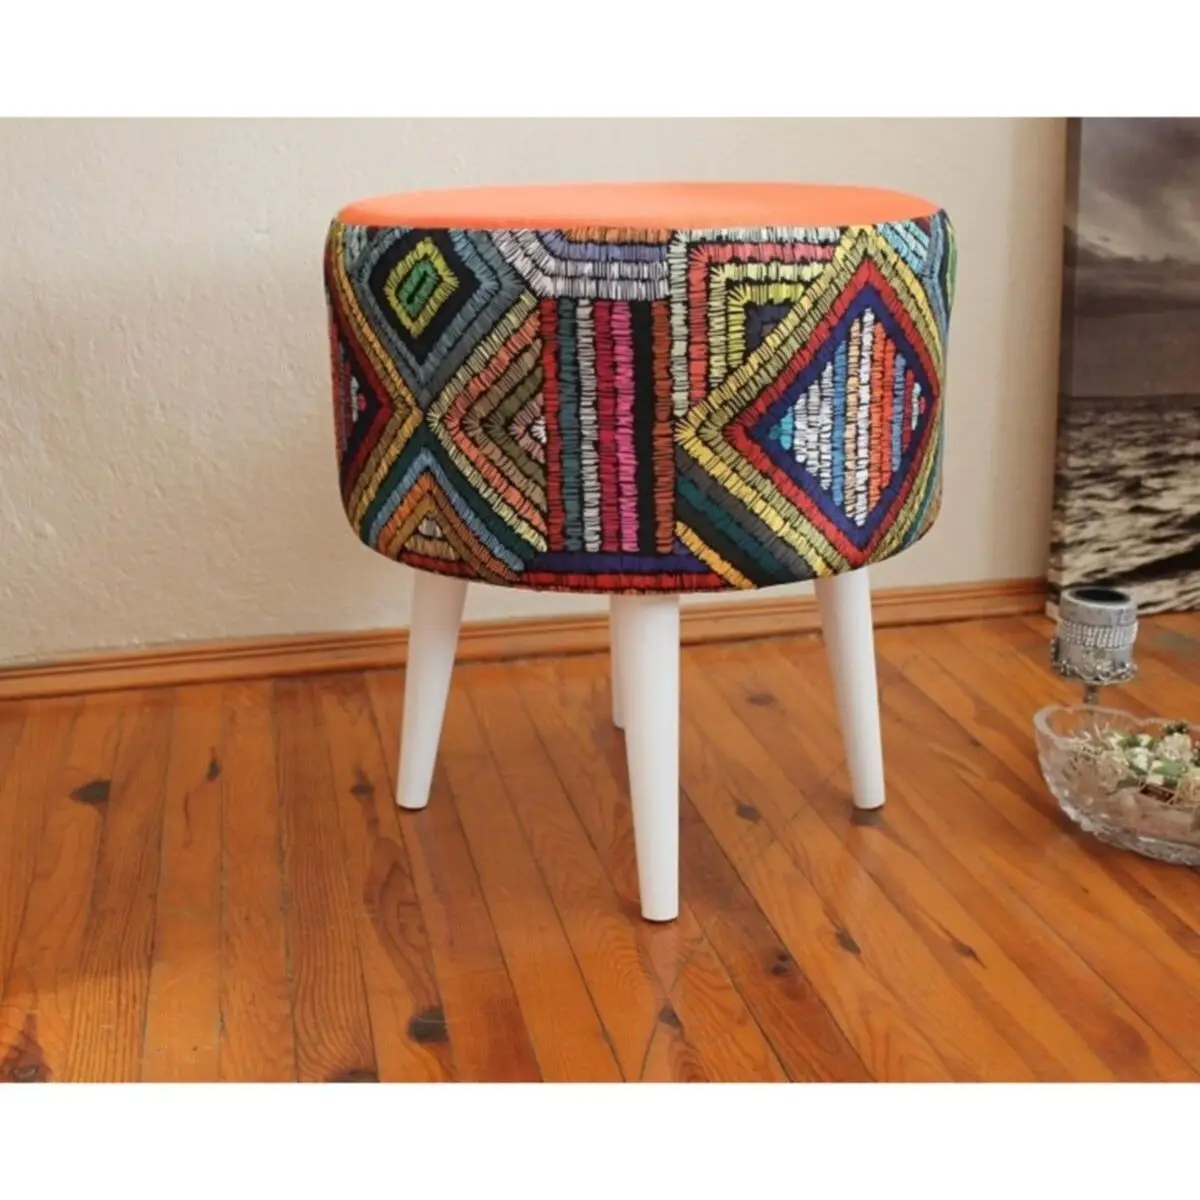 

Hornbeam Retro Wooden Leg Decorative Ethnic Top Tile Pattern Cylinder Pouf Bench Sofa Chair Special Design Nordic Home